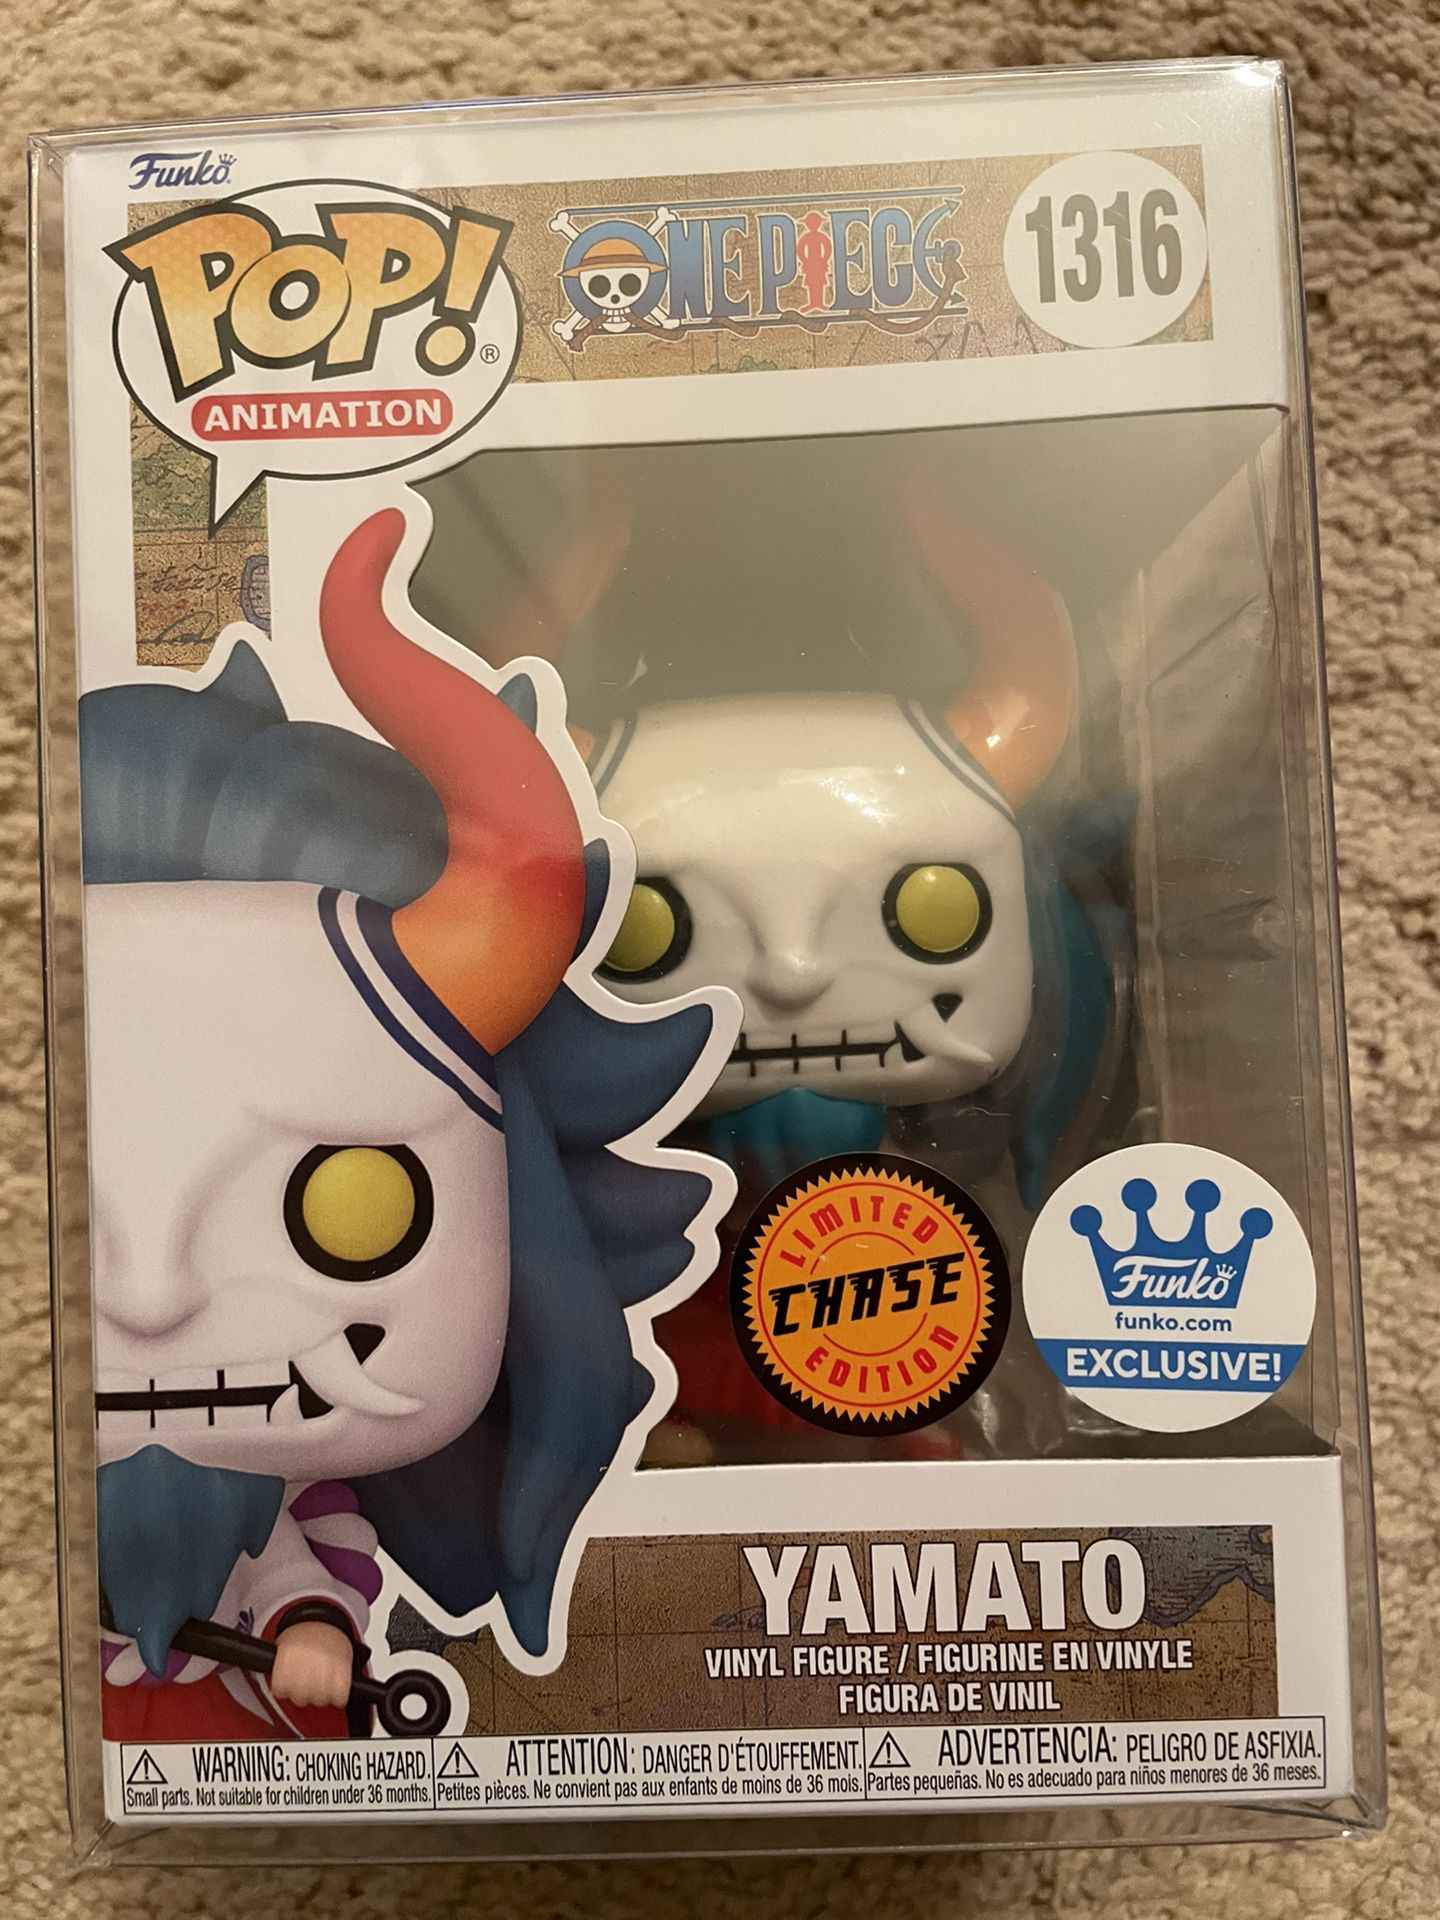 Funko Pop Funko Shop Exclusive Anime One Piece Yamato Rare Limited Chase Variant 